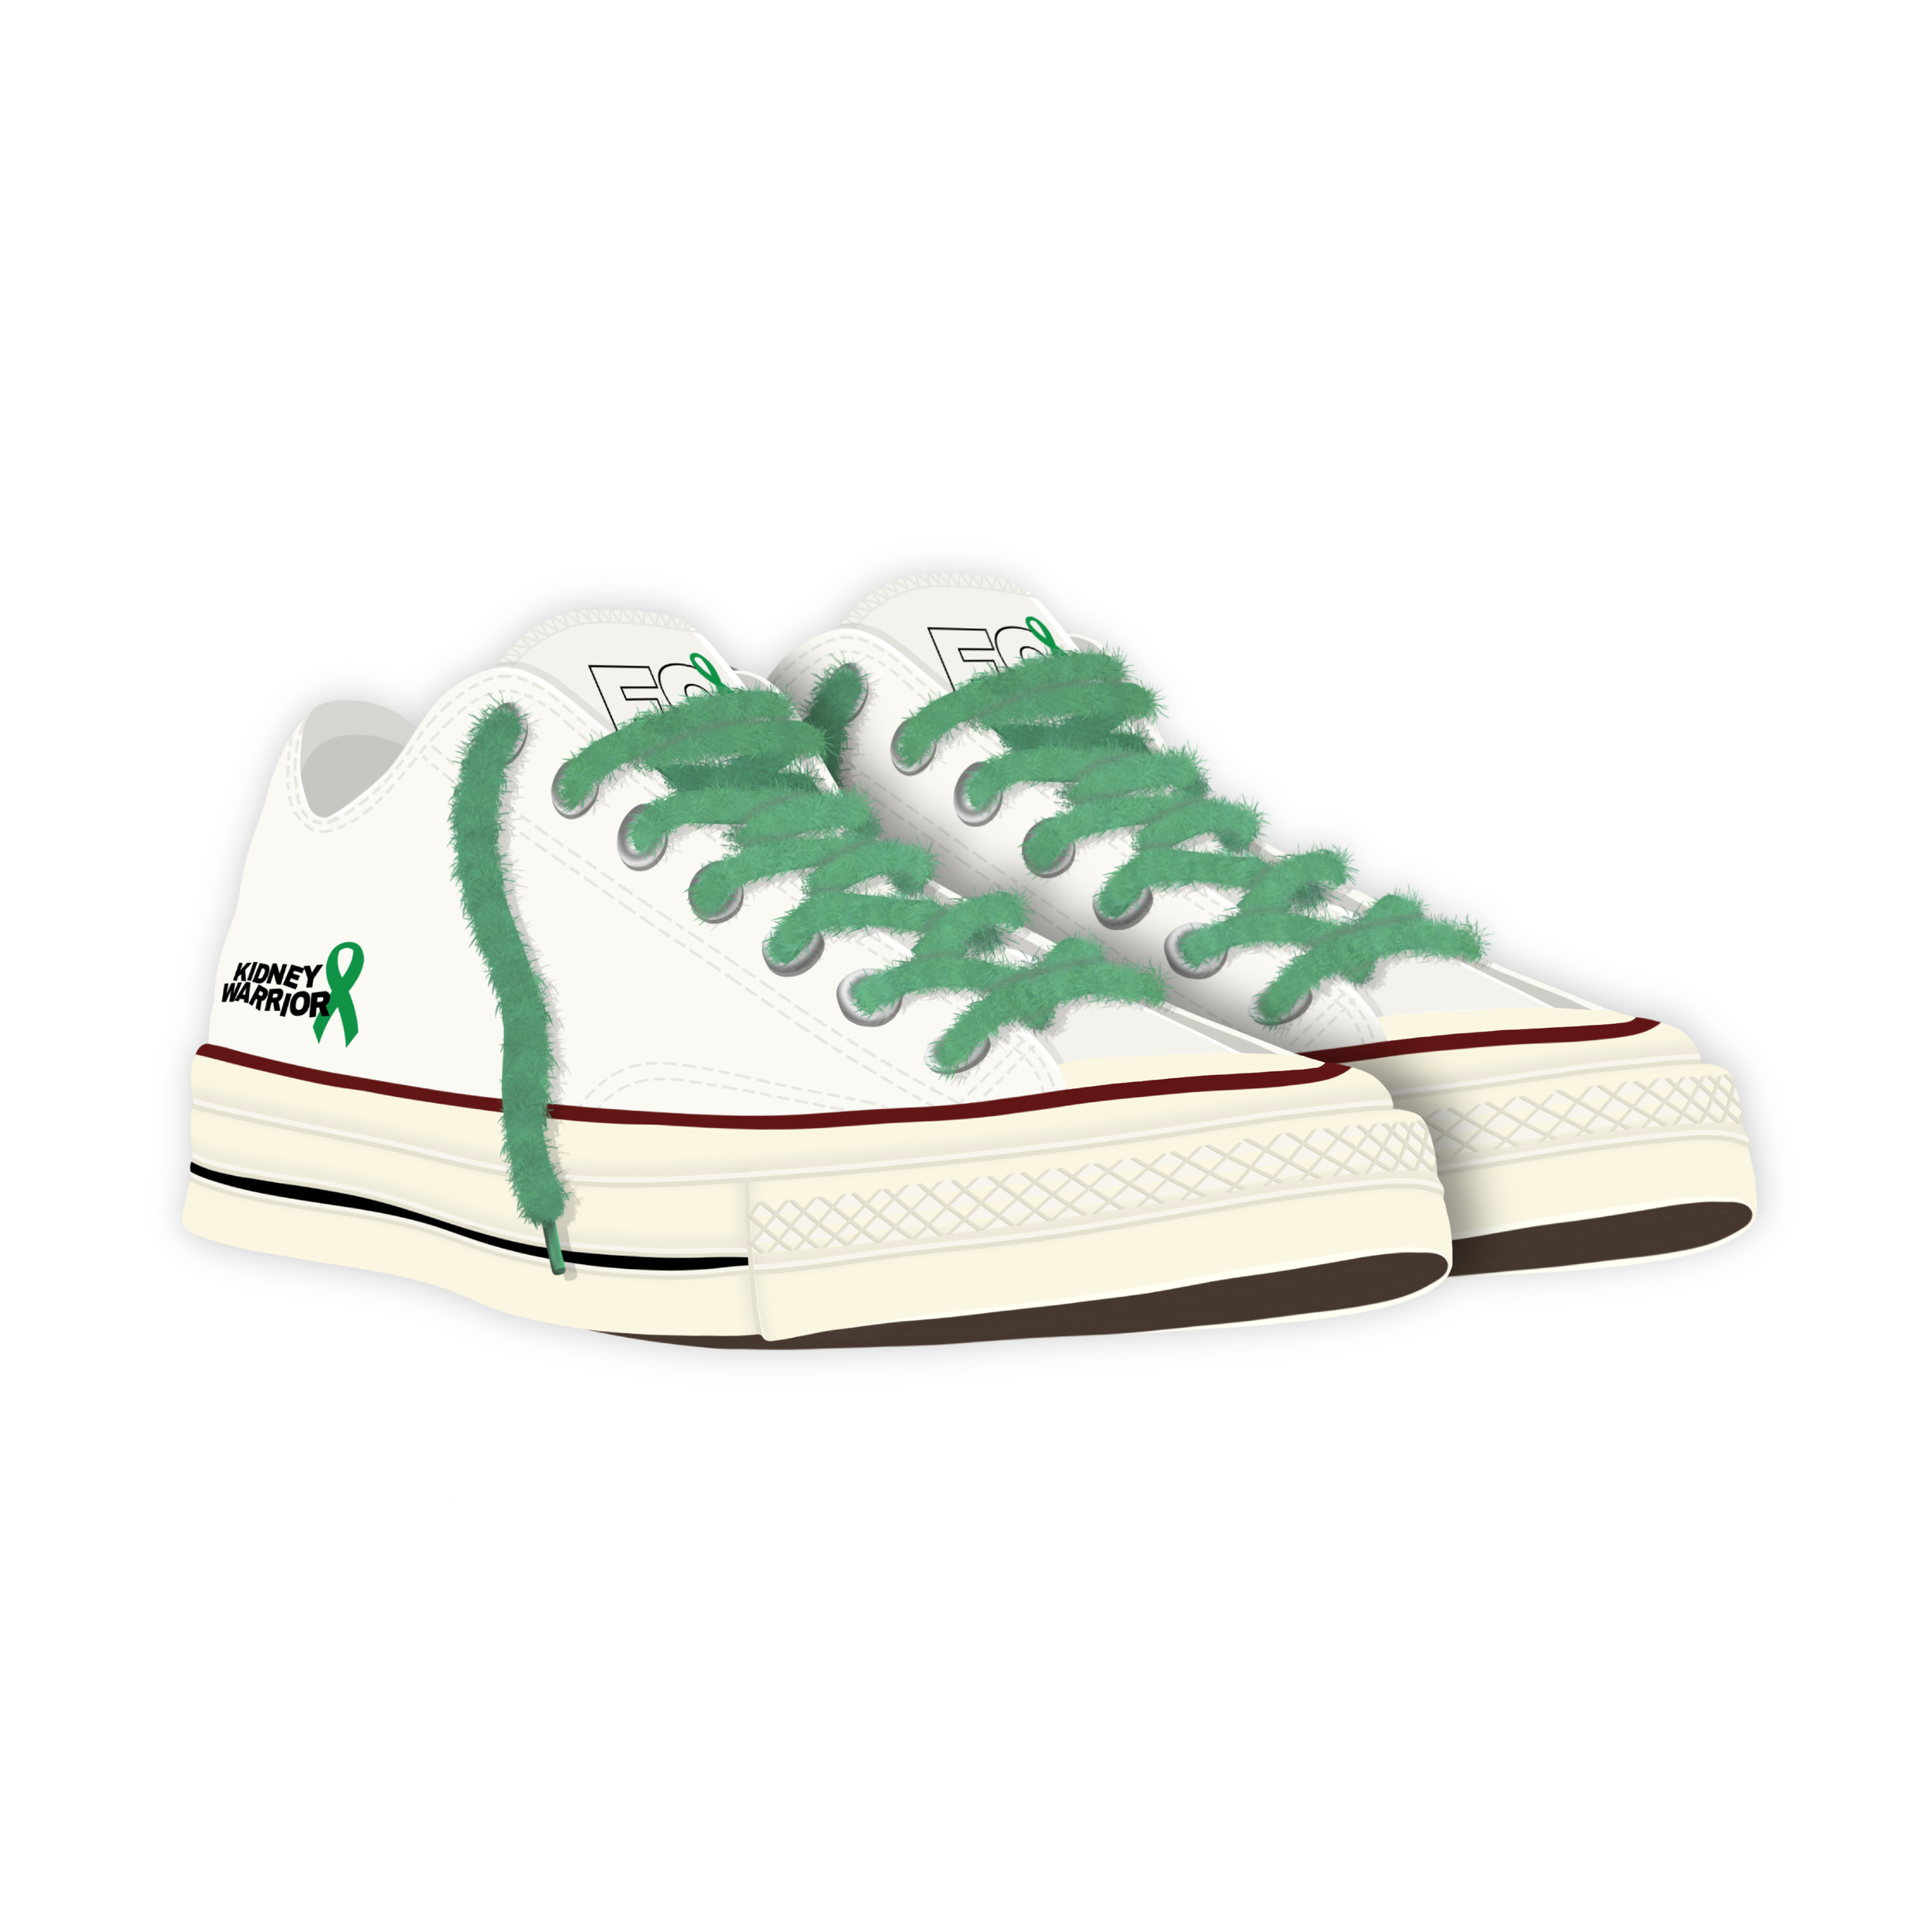 KW_shoes.png